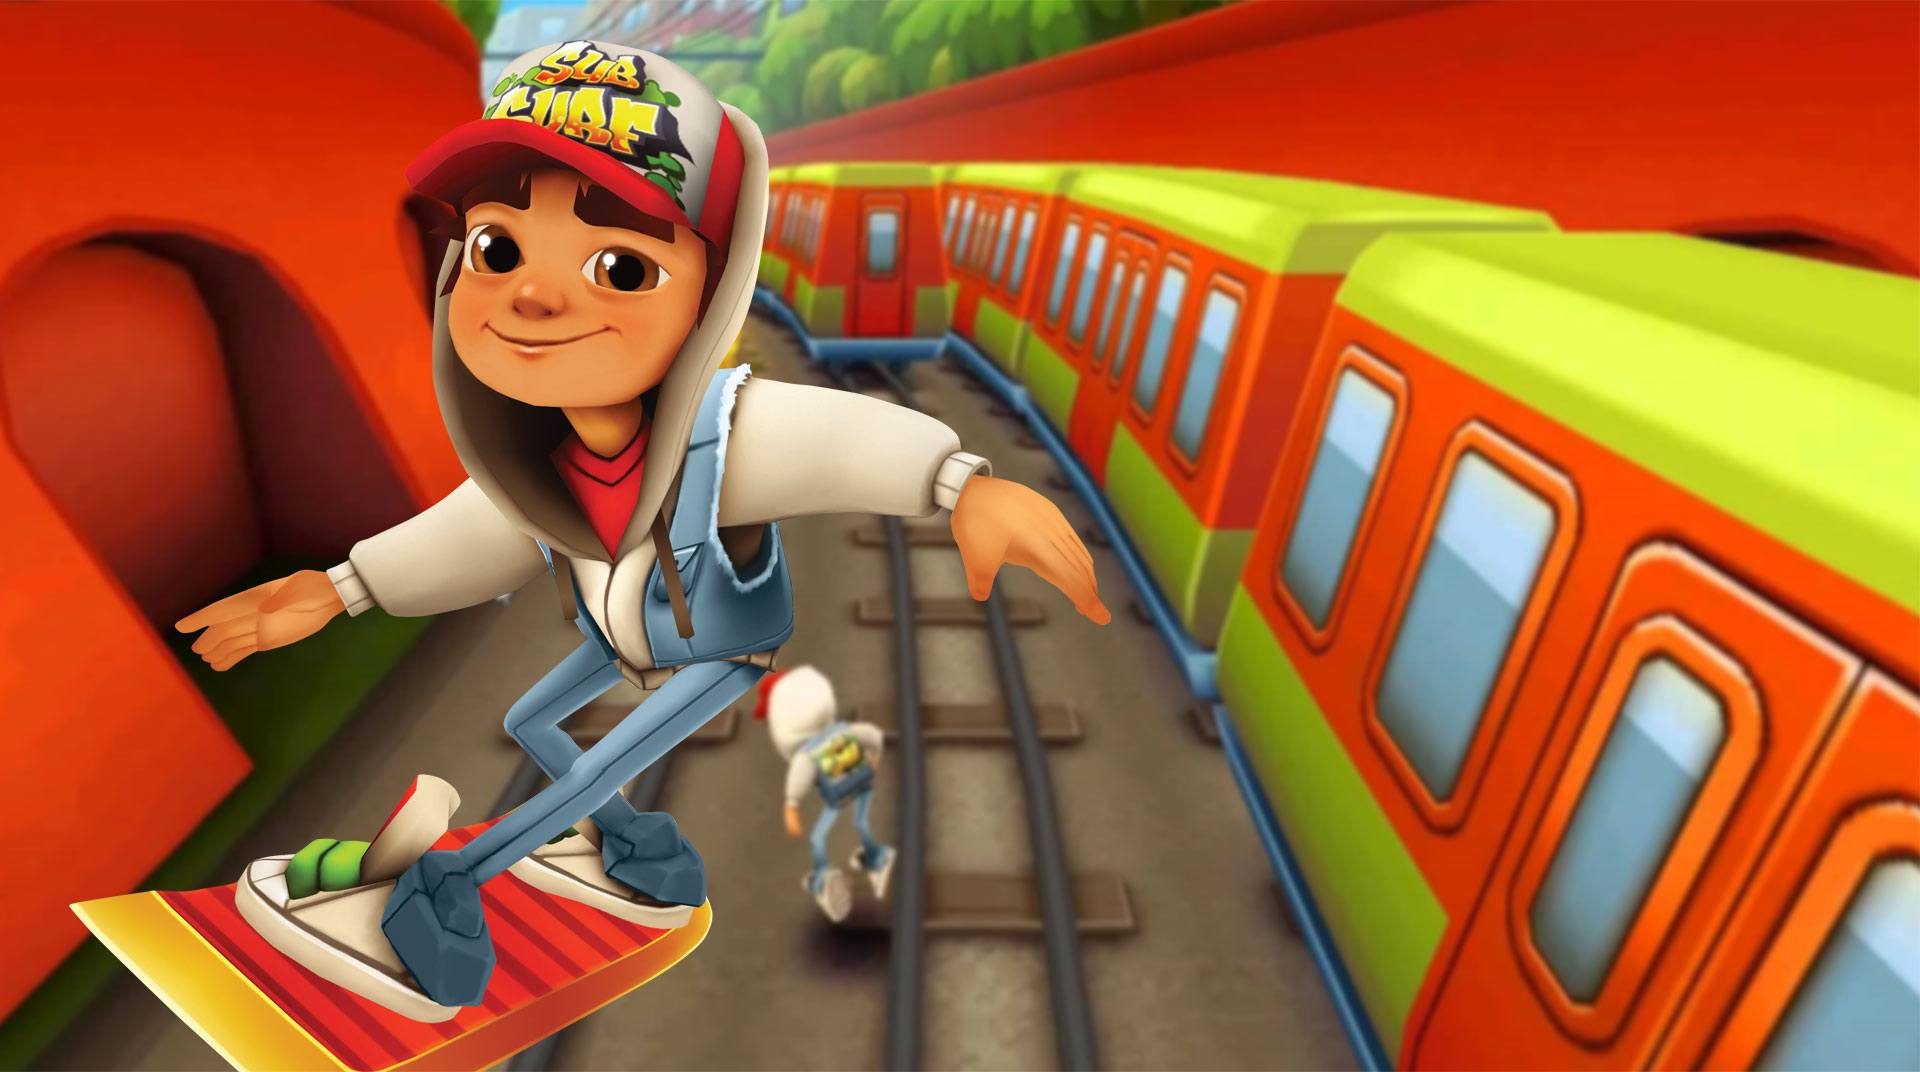 Play Subway Surfers on PC with Free Emulator To Make High Score